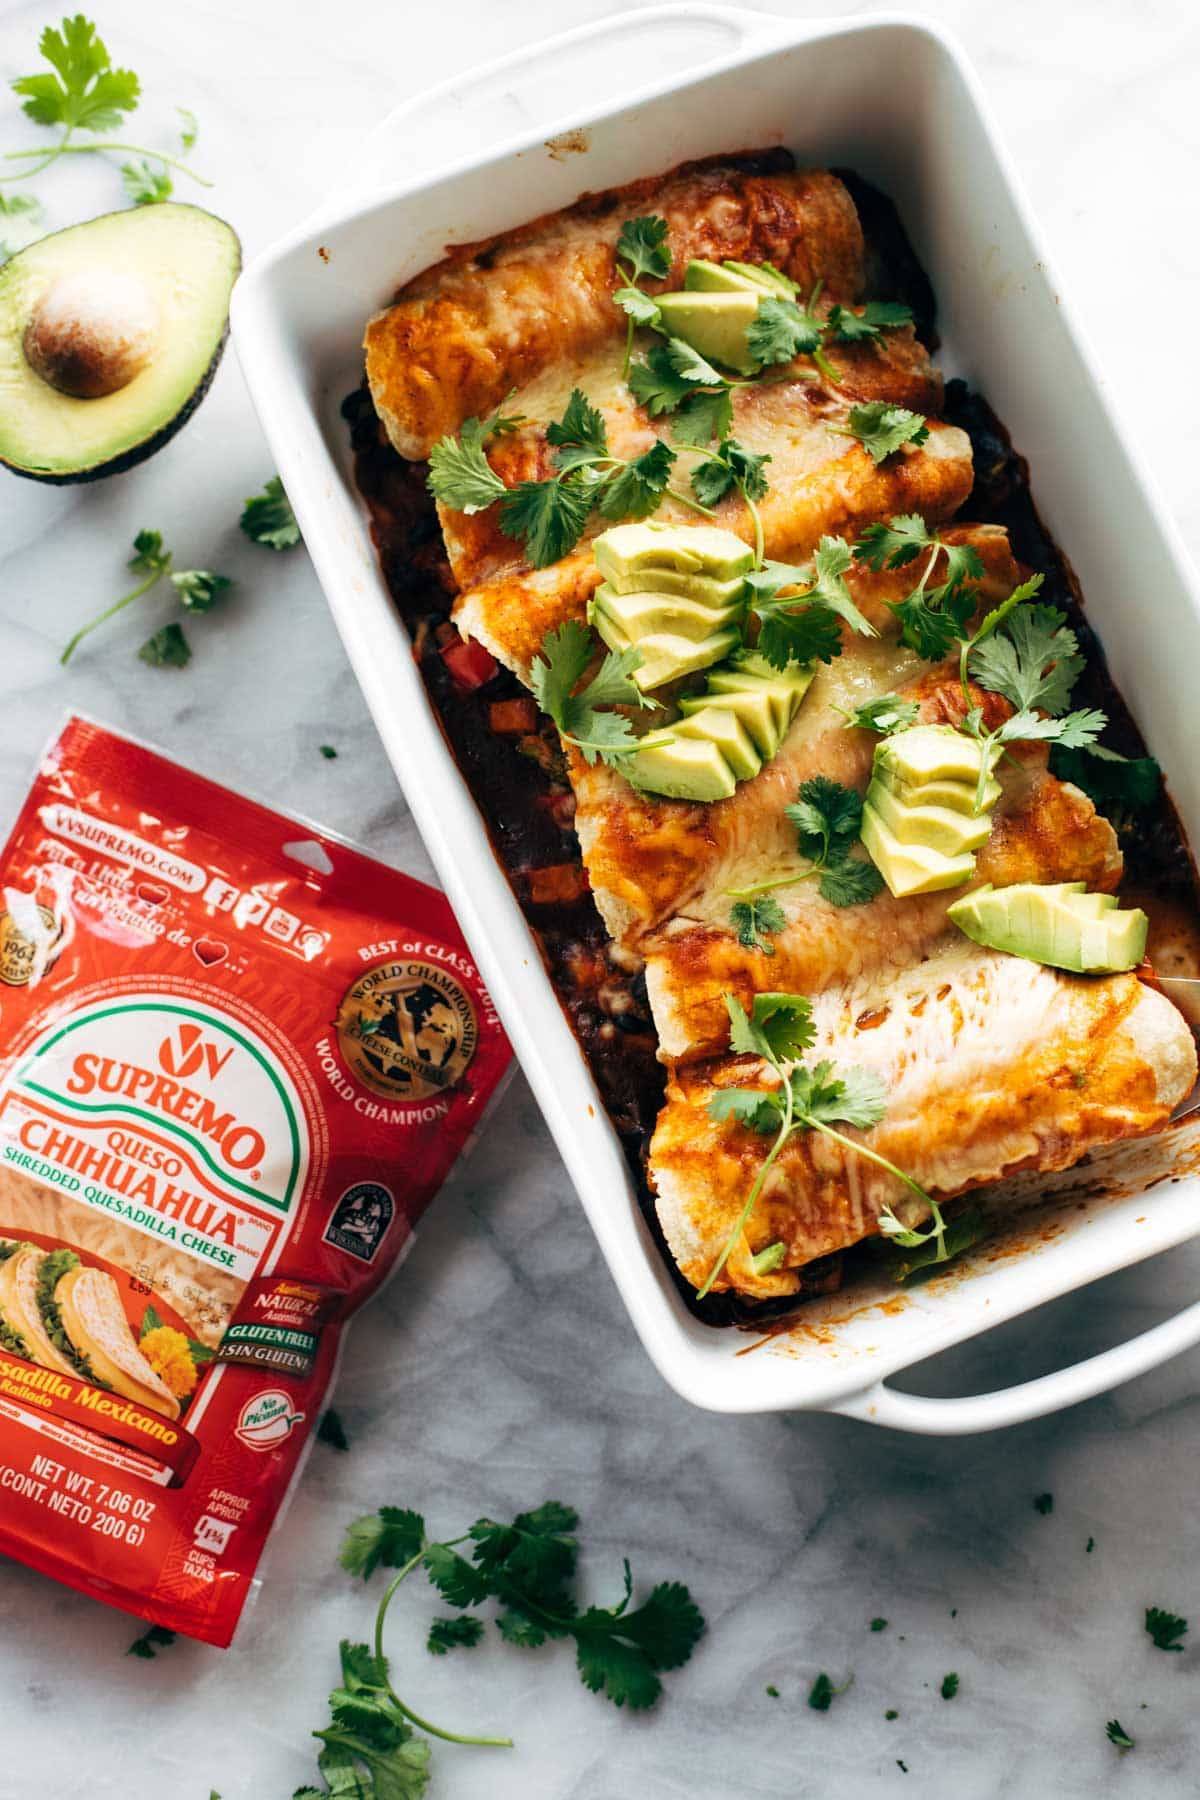 Veggie enchiladas in a pan with Chihuahua Cheese.